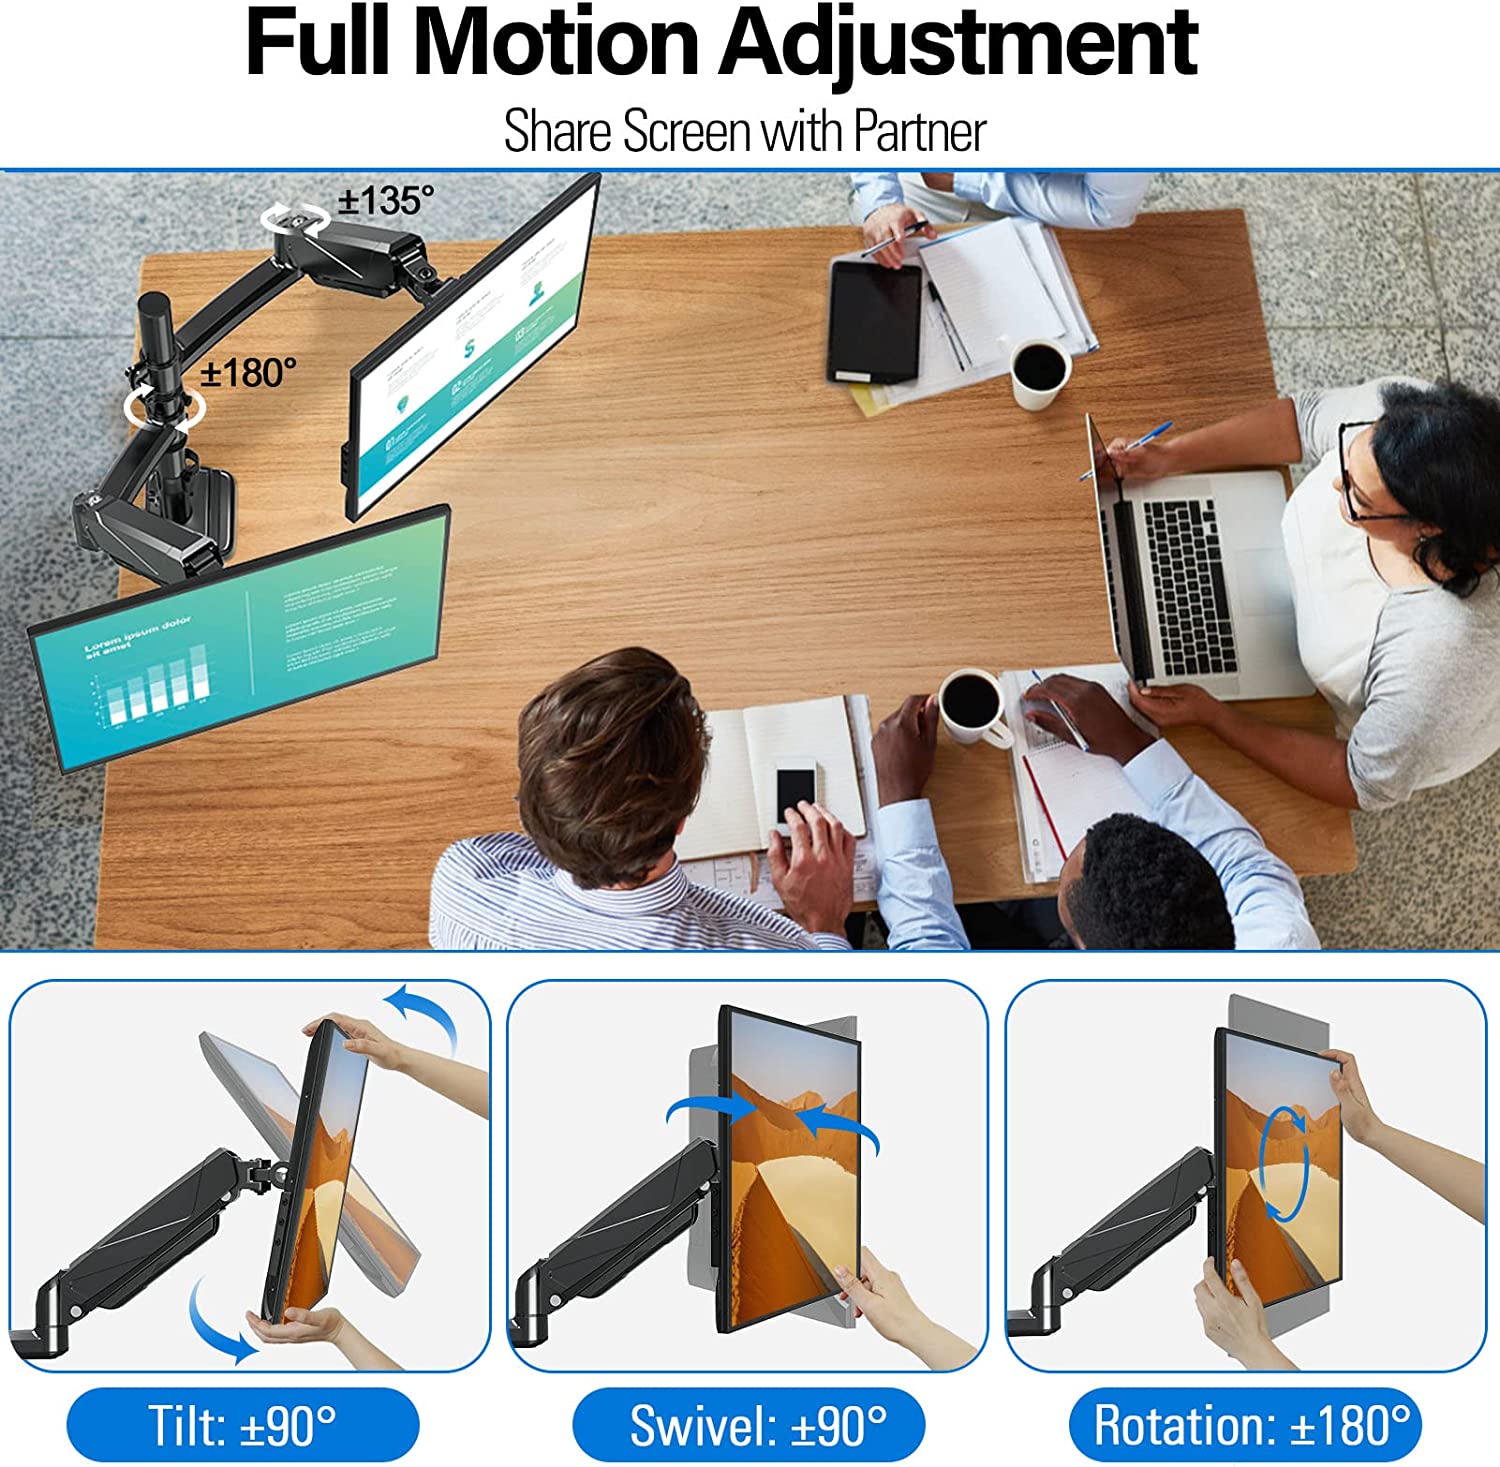  MOUNTUP Dual Monitor Stand Desk Mount - Fully